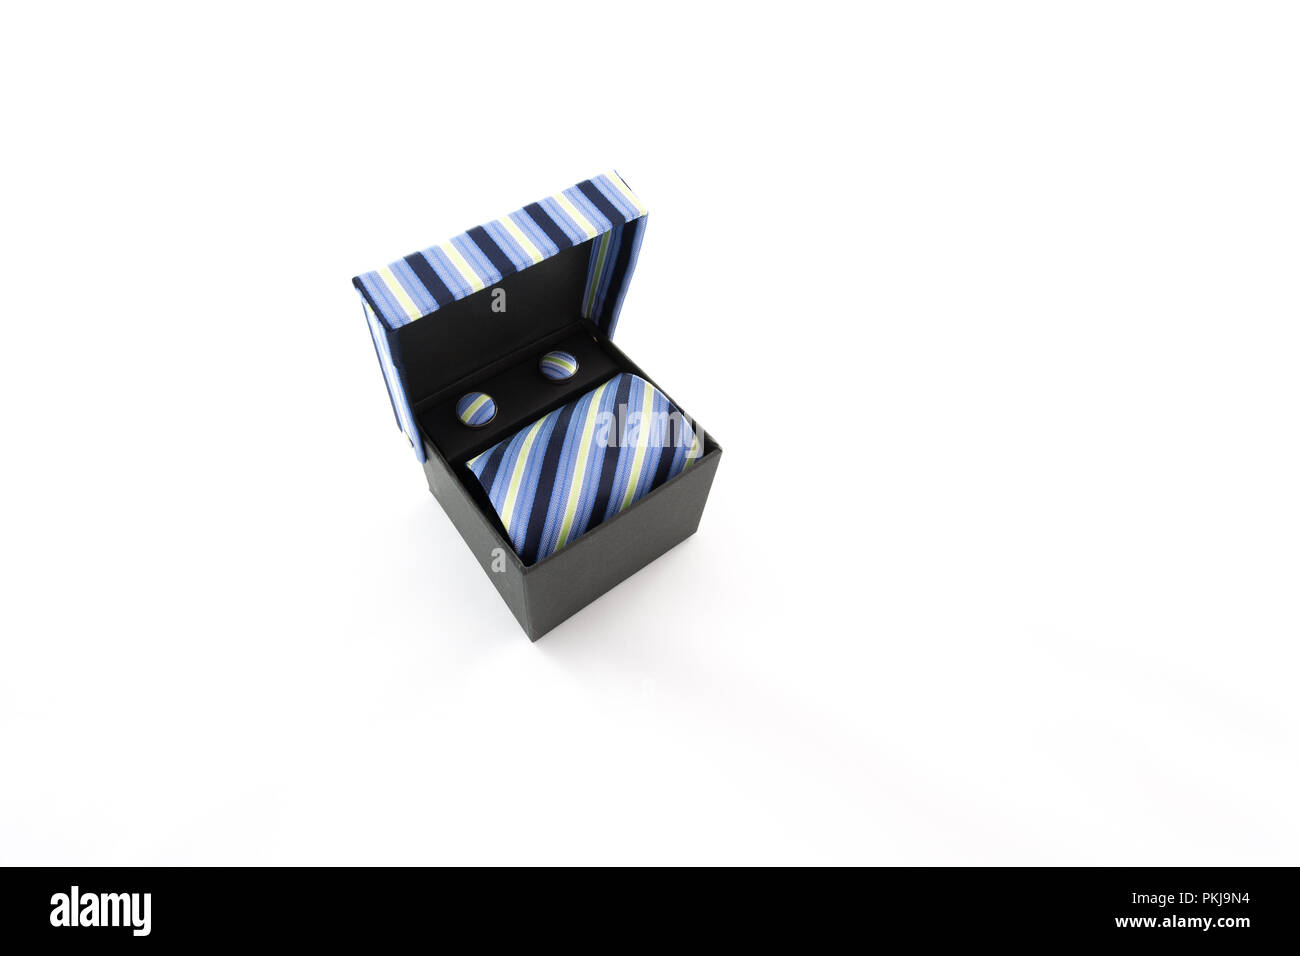 Neck tie and cuff link, blue and green seam geometric pattern, textured multicolor stripes fabric, set in the gift box, on white background Stock Photo